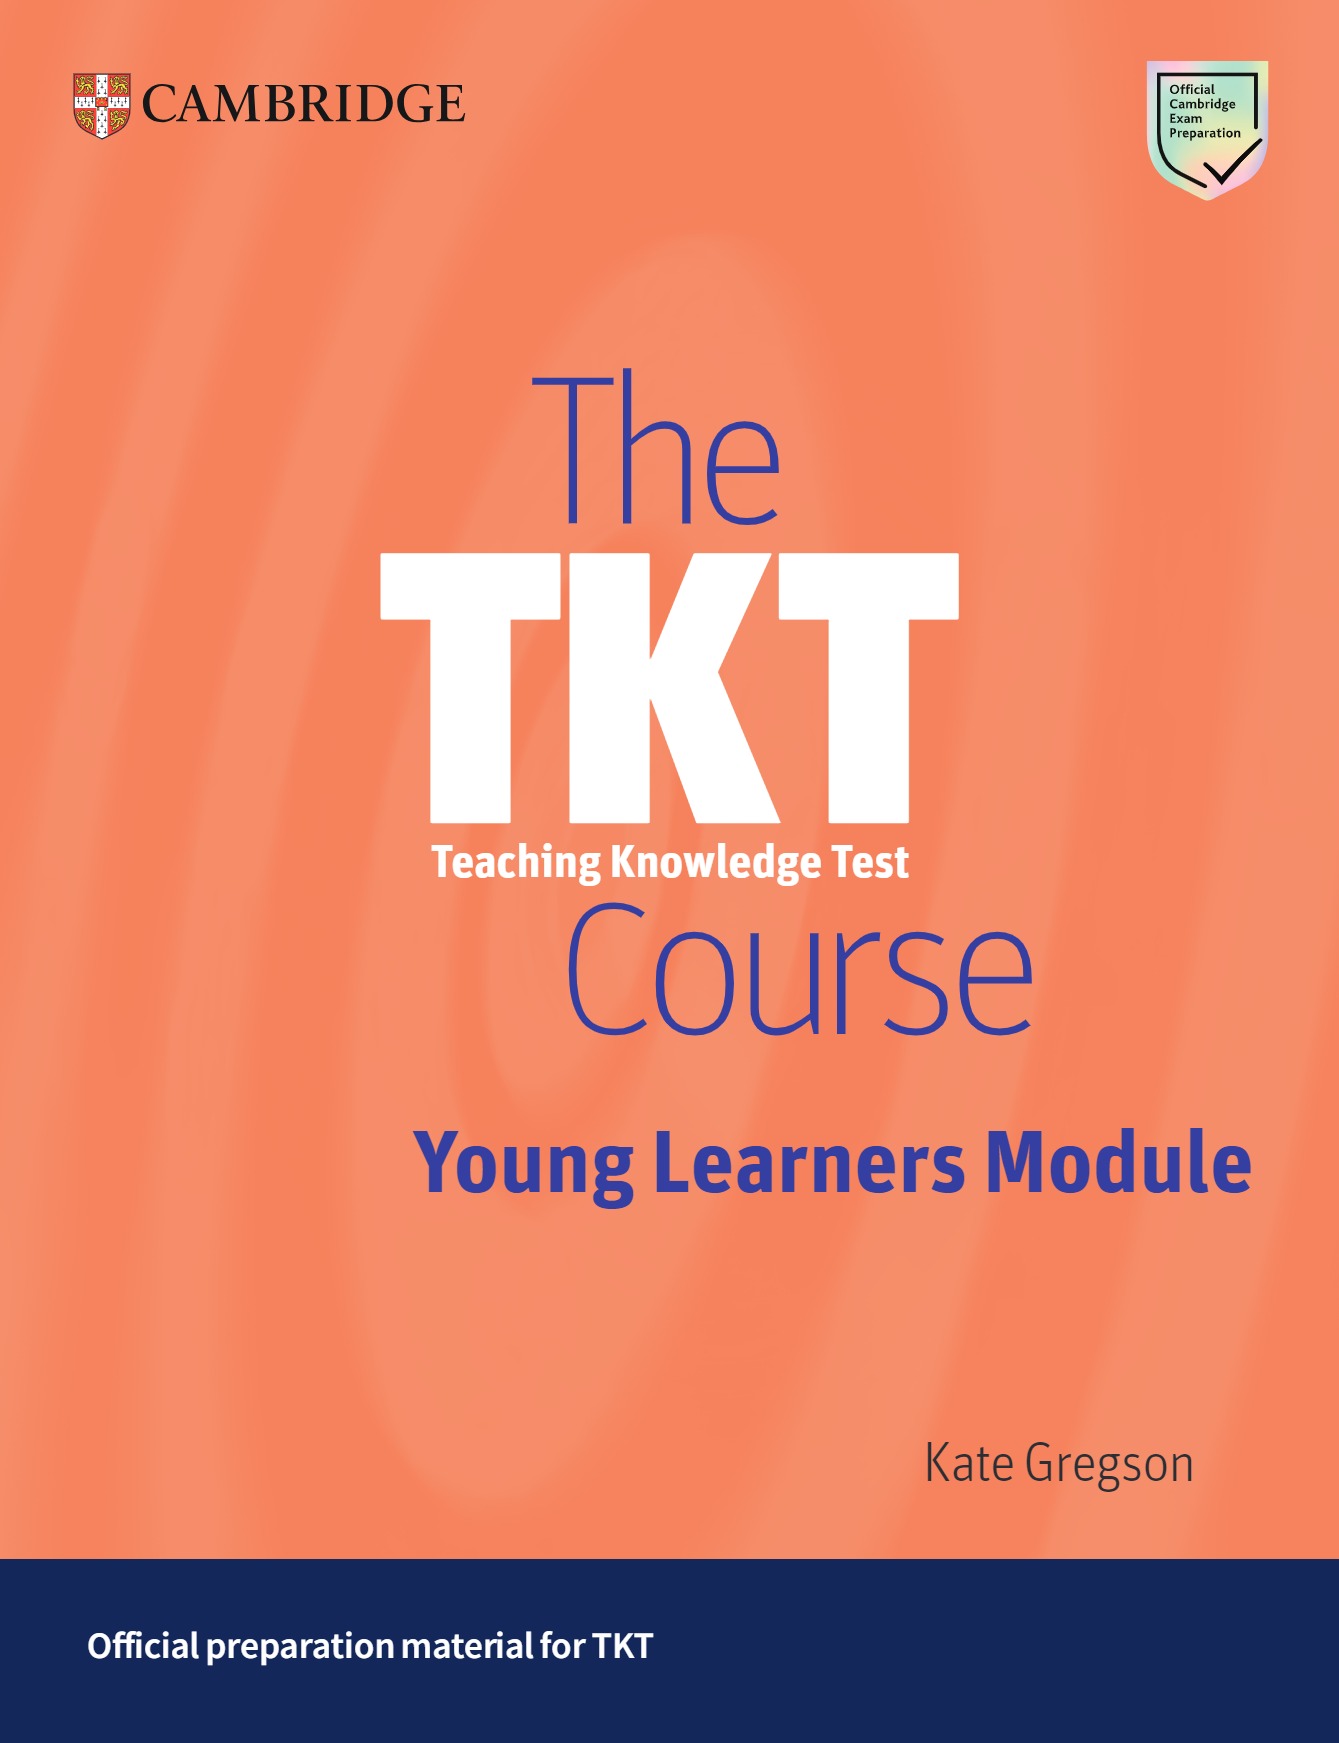 The TKT Course Young Learners Module